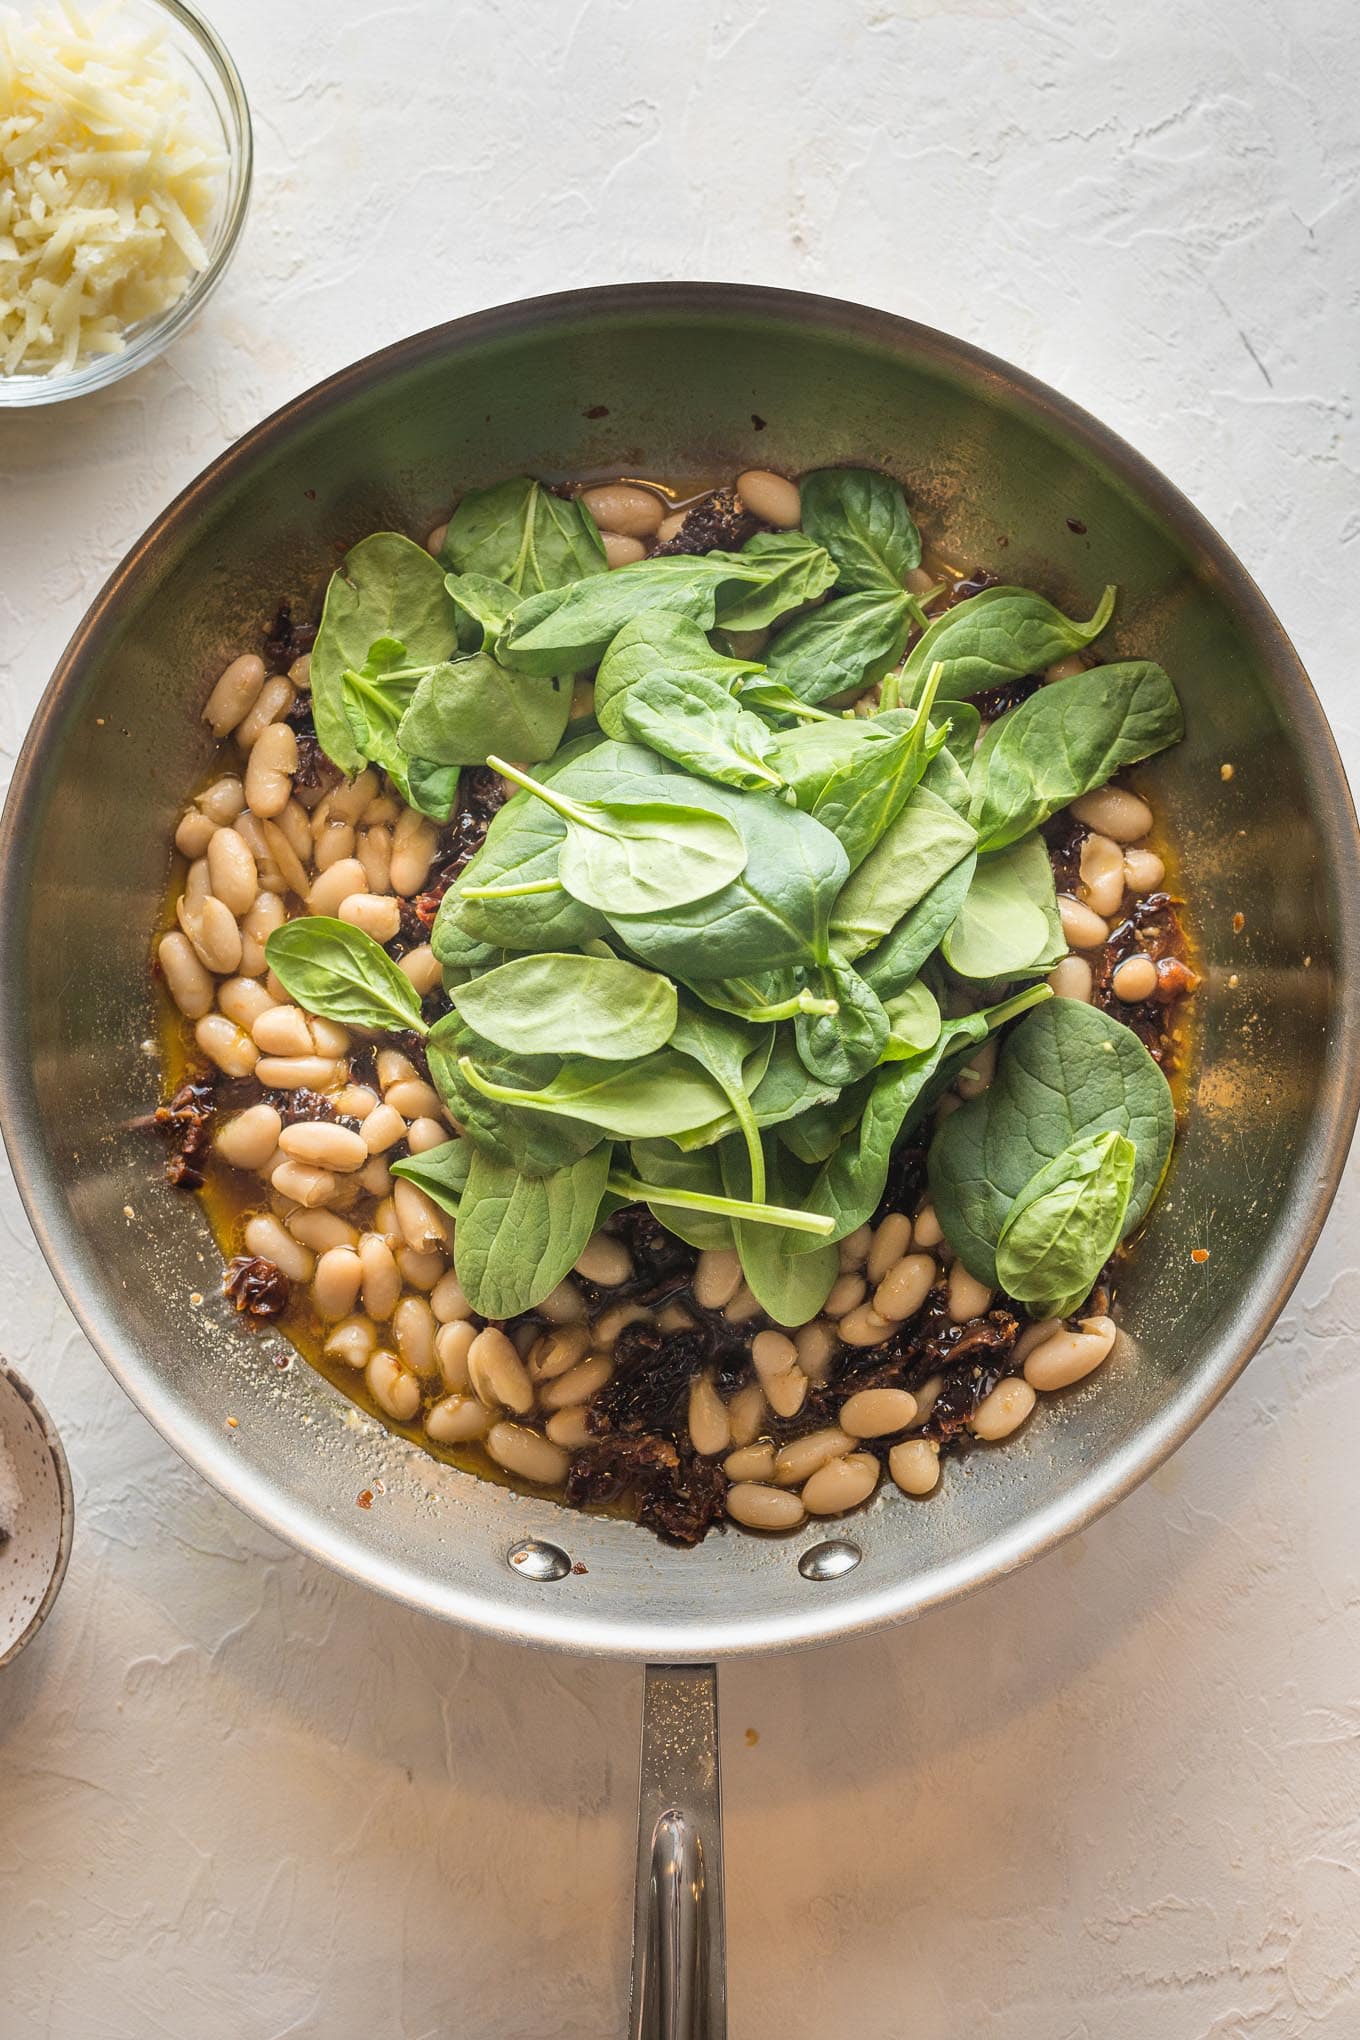 Spinach added to skillet with beans.